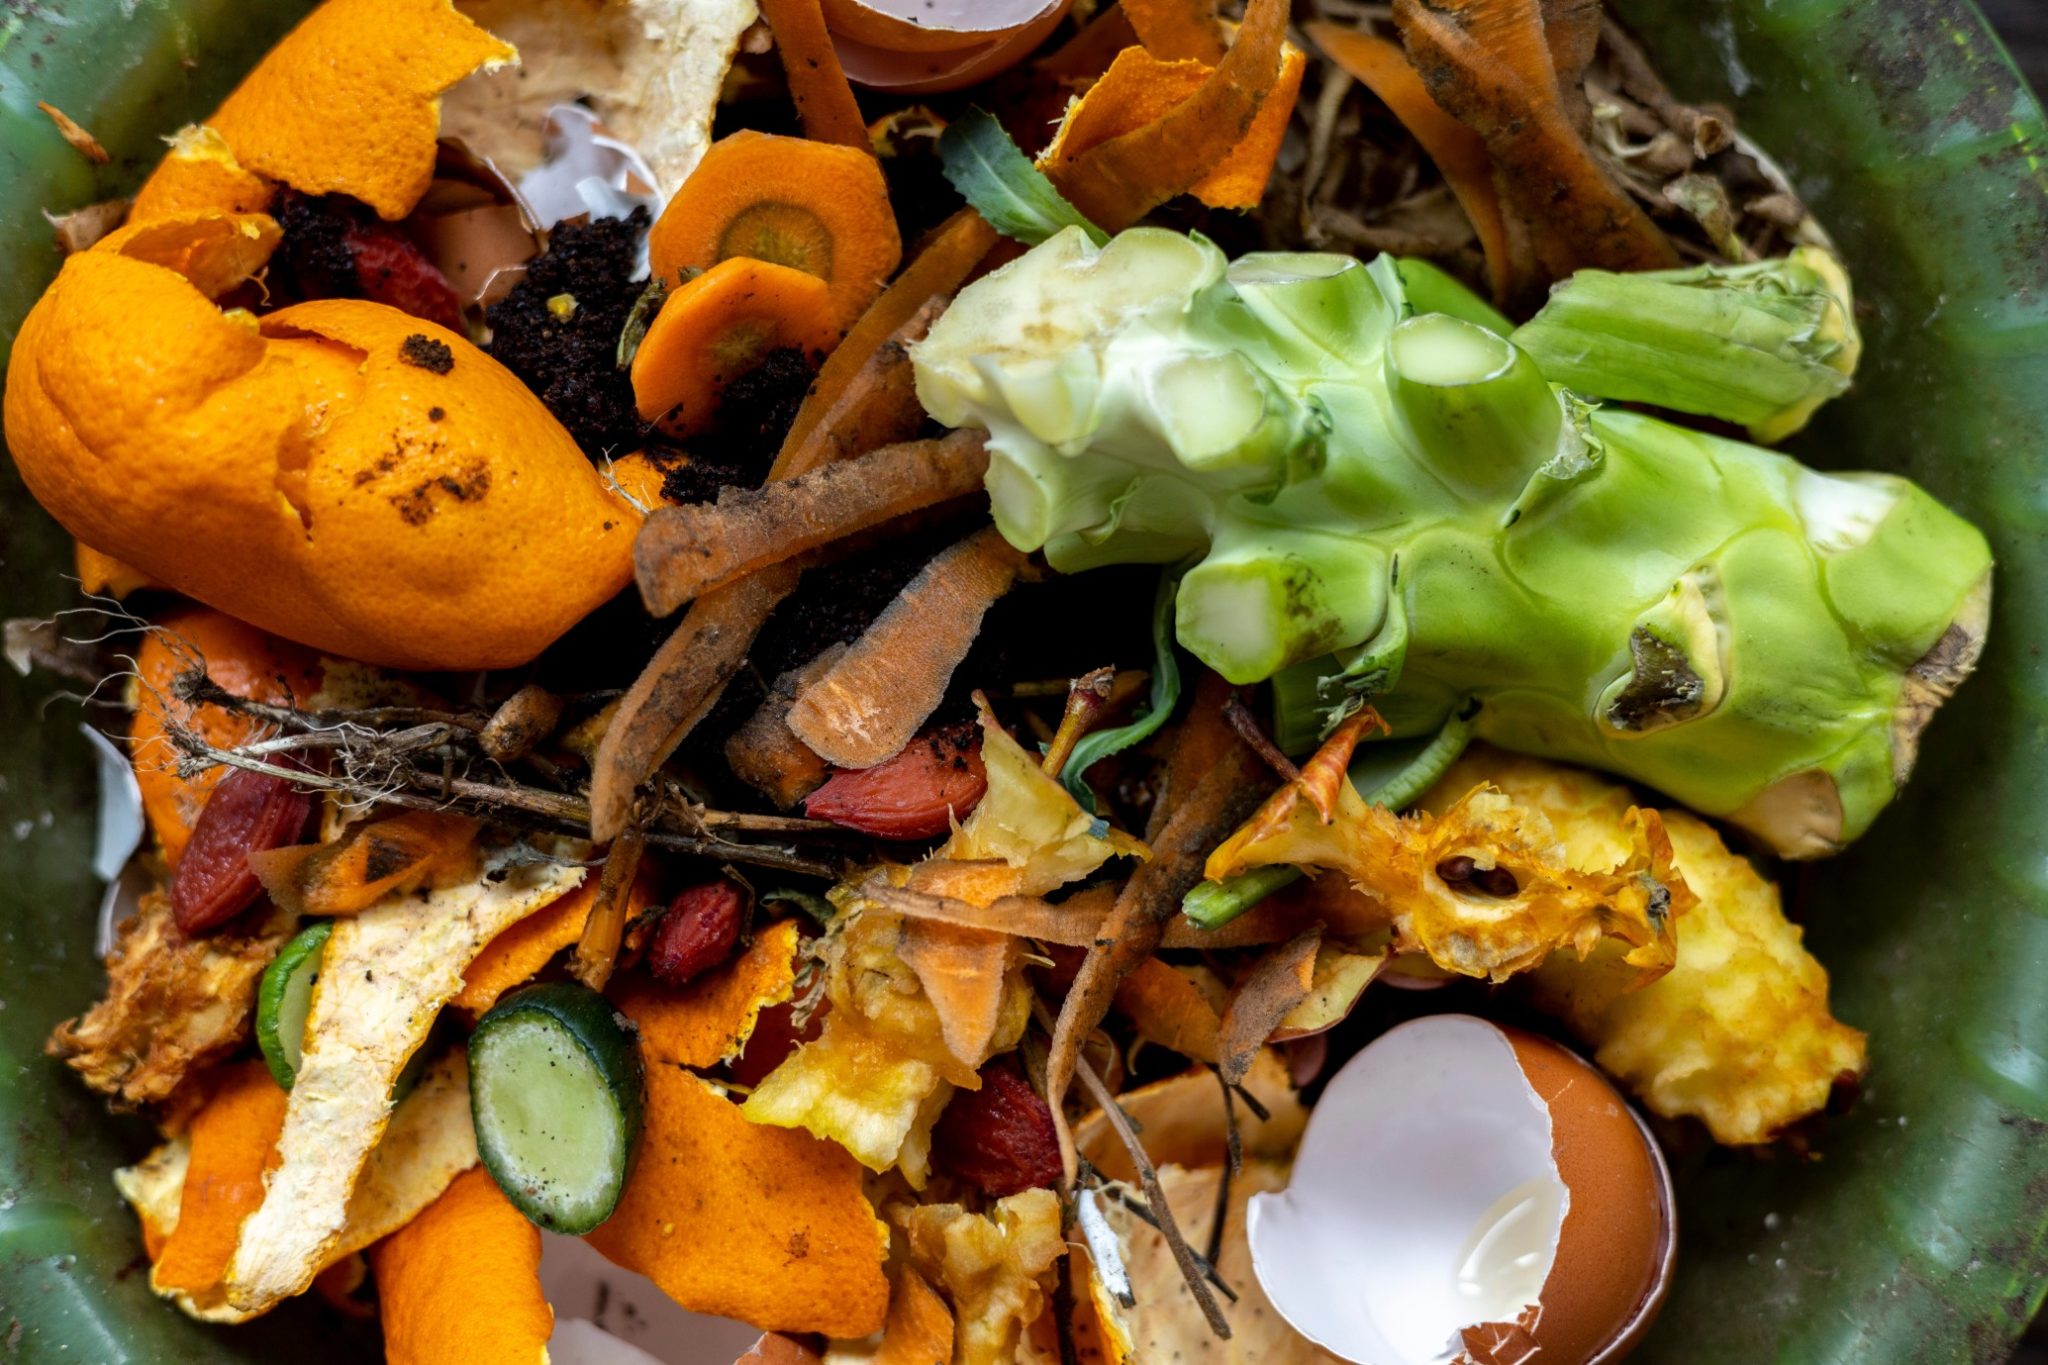 Food waste in a compost bin.